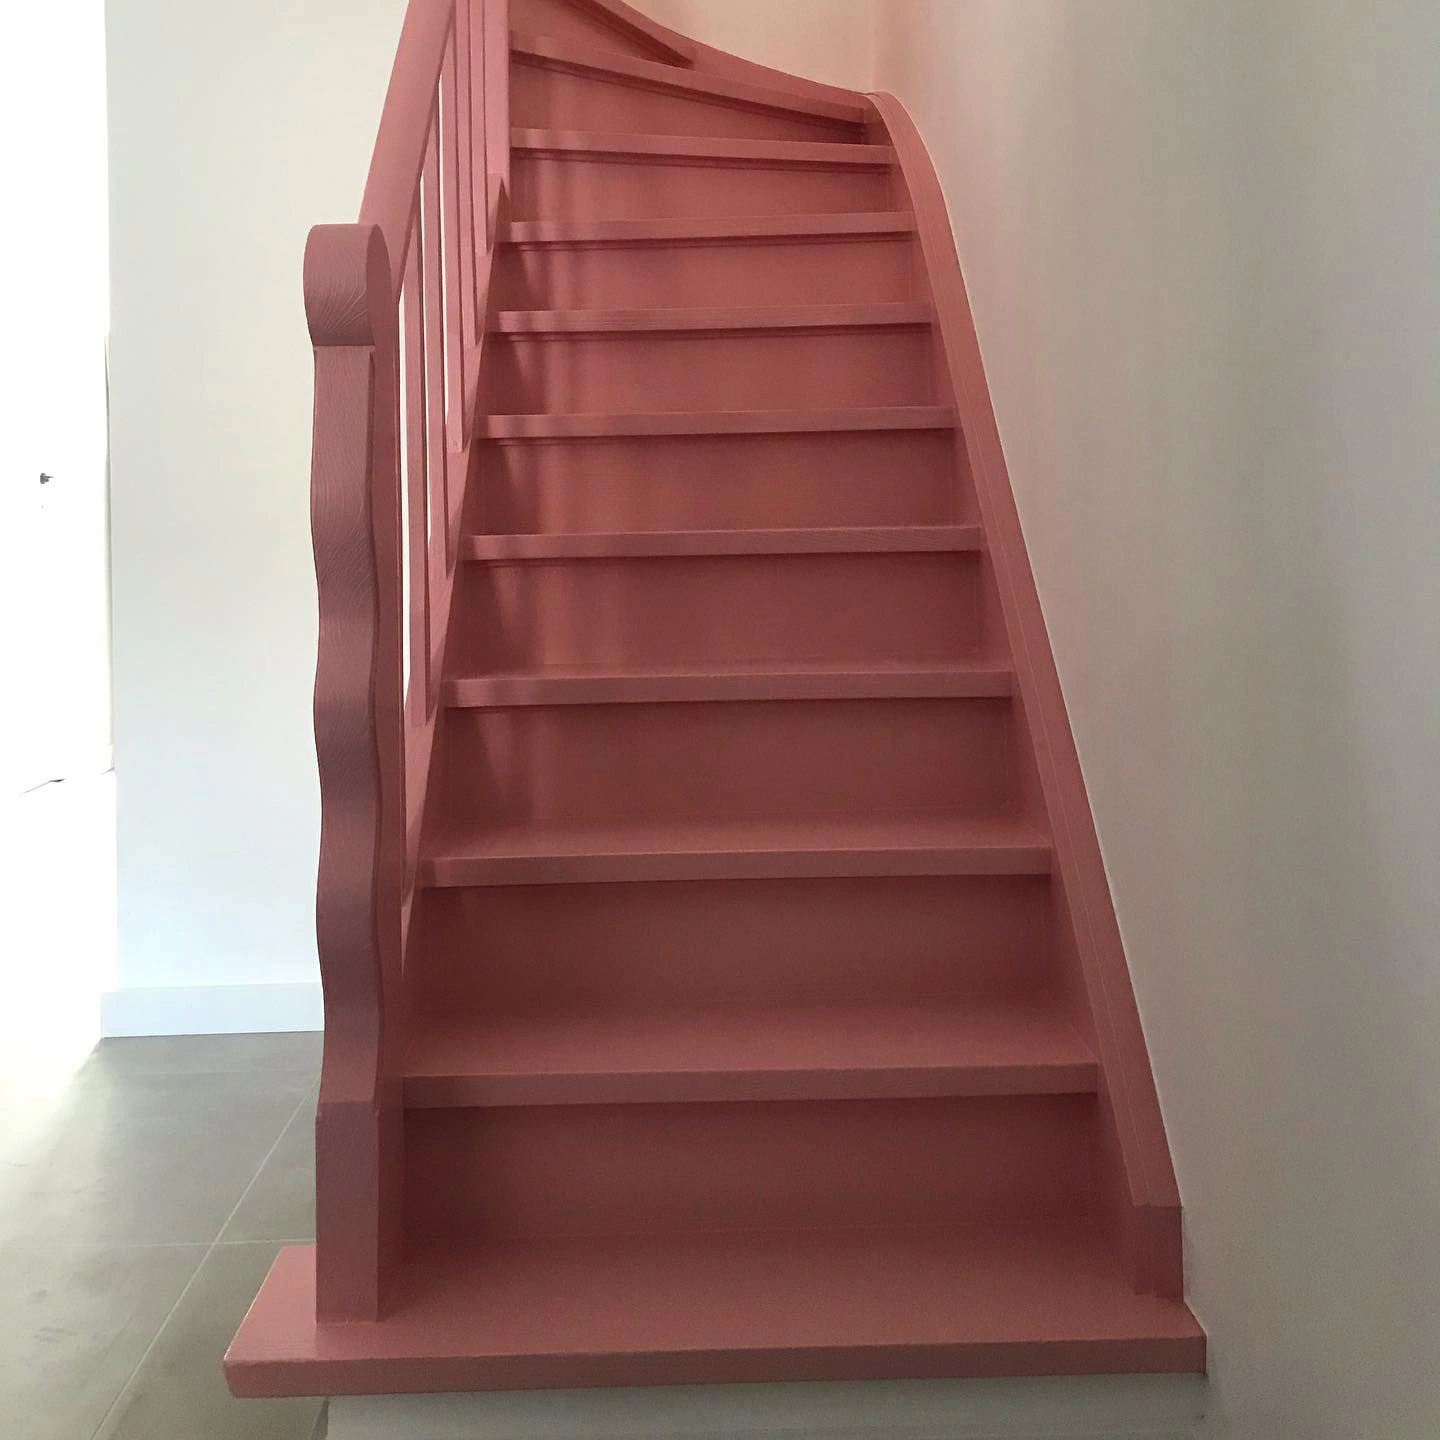 Light pink RAL 3015 stairs